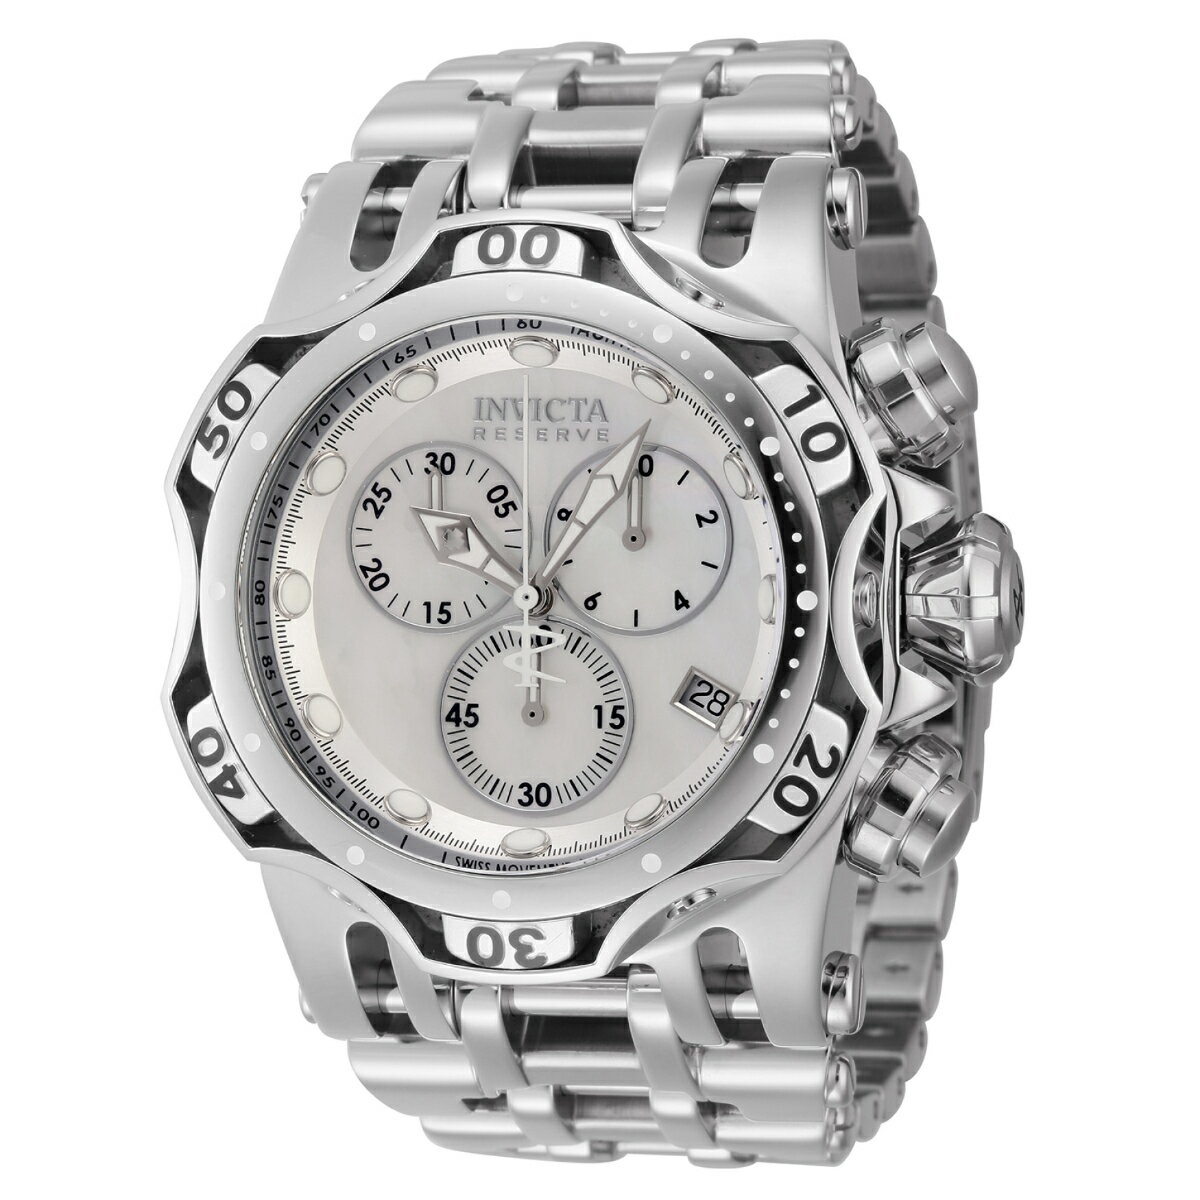 InvictaCBN^ Reserve Chaos Swiss ETA G10.212 Caliber YEHb` Mother of Pearl_Ct 54mm X`[ (45653)